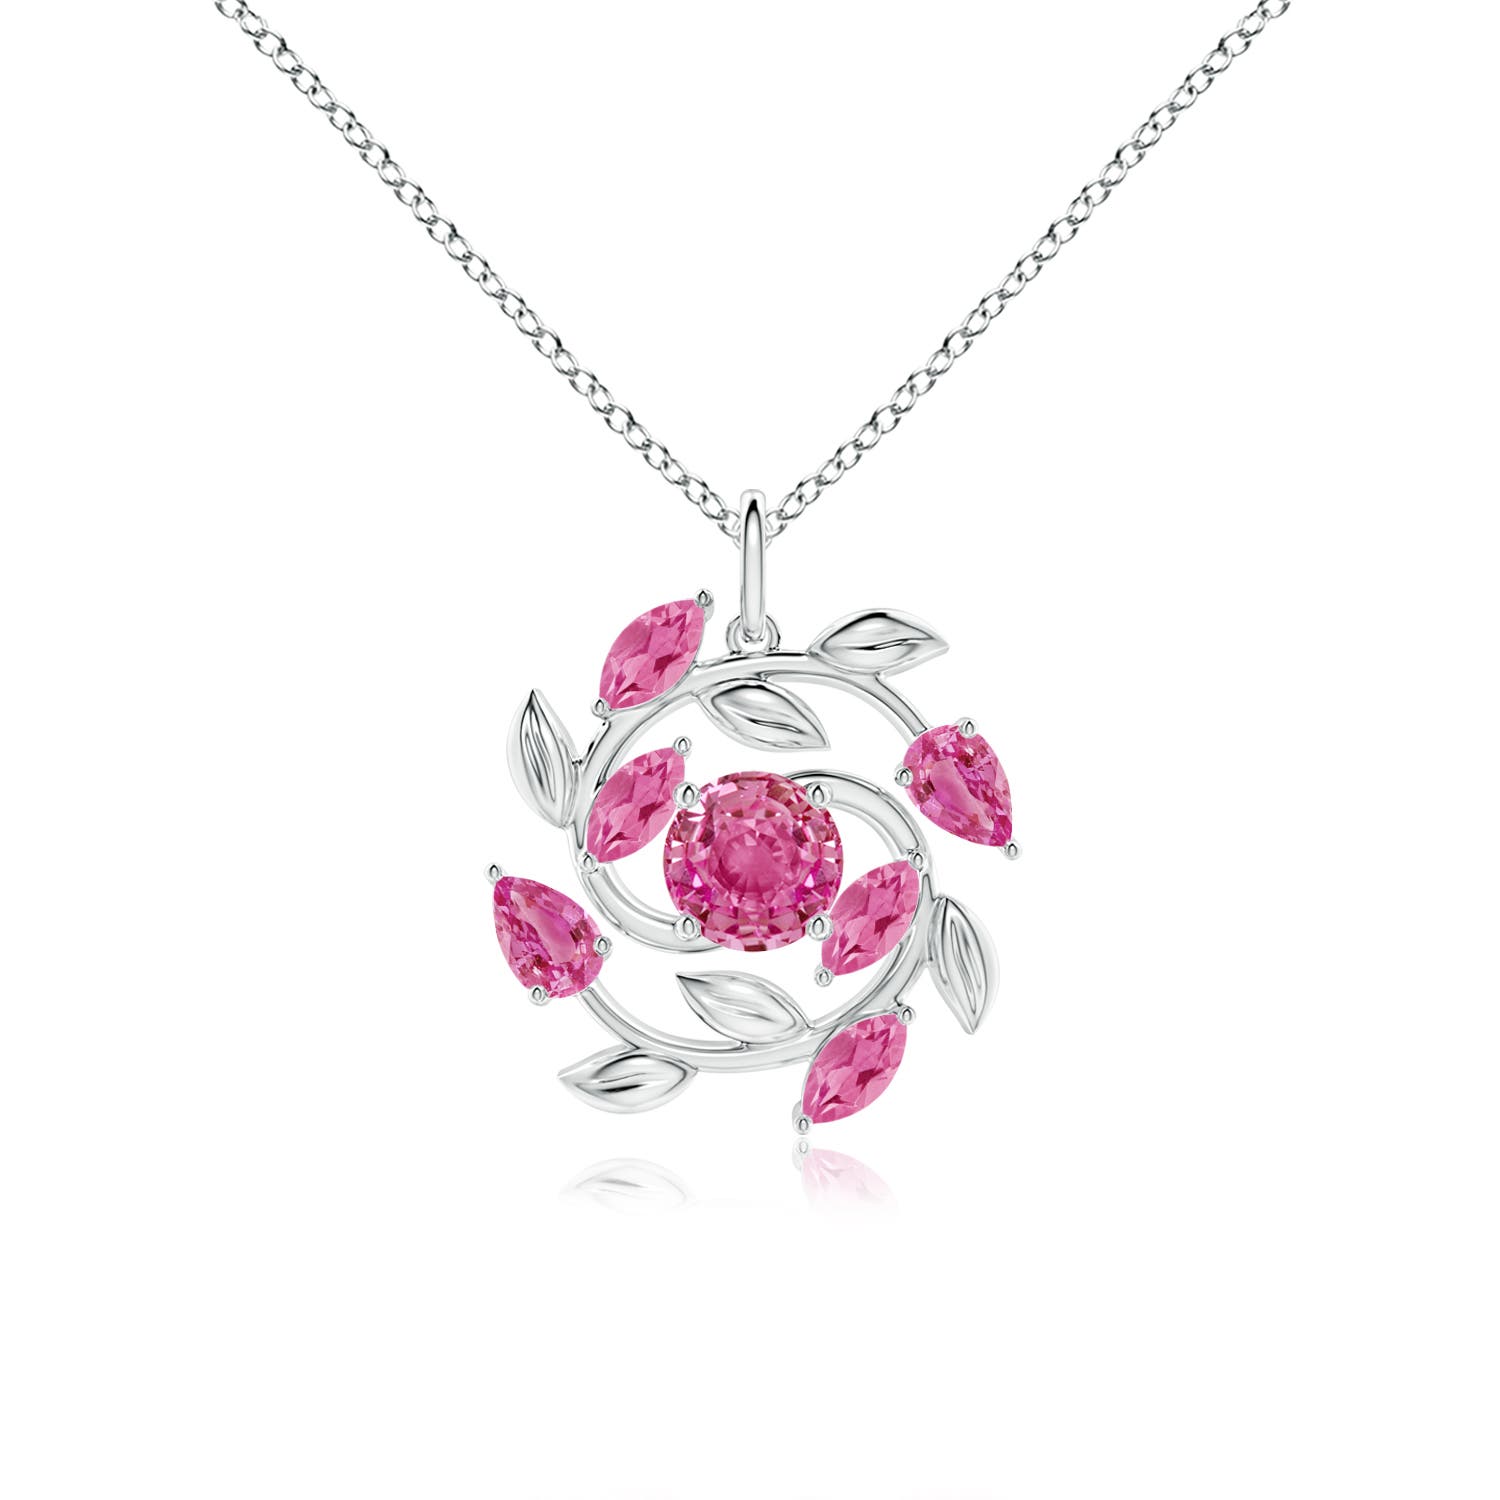 Necklace Heart Made of White Gold with Pink Sapphire